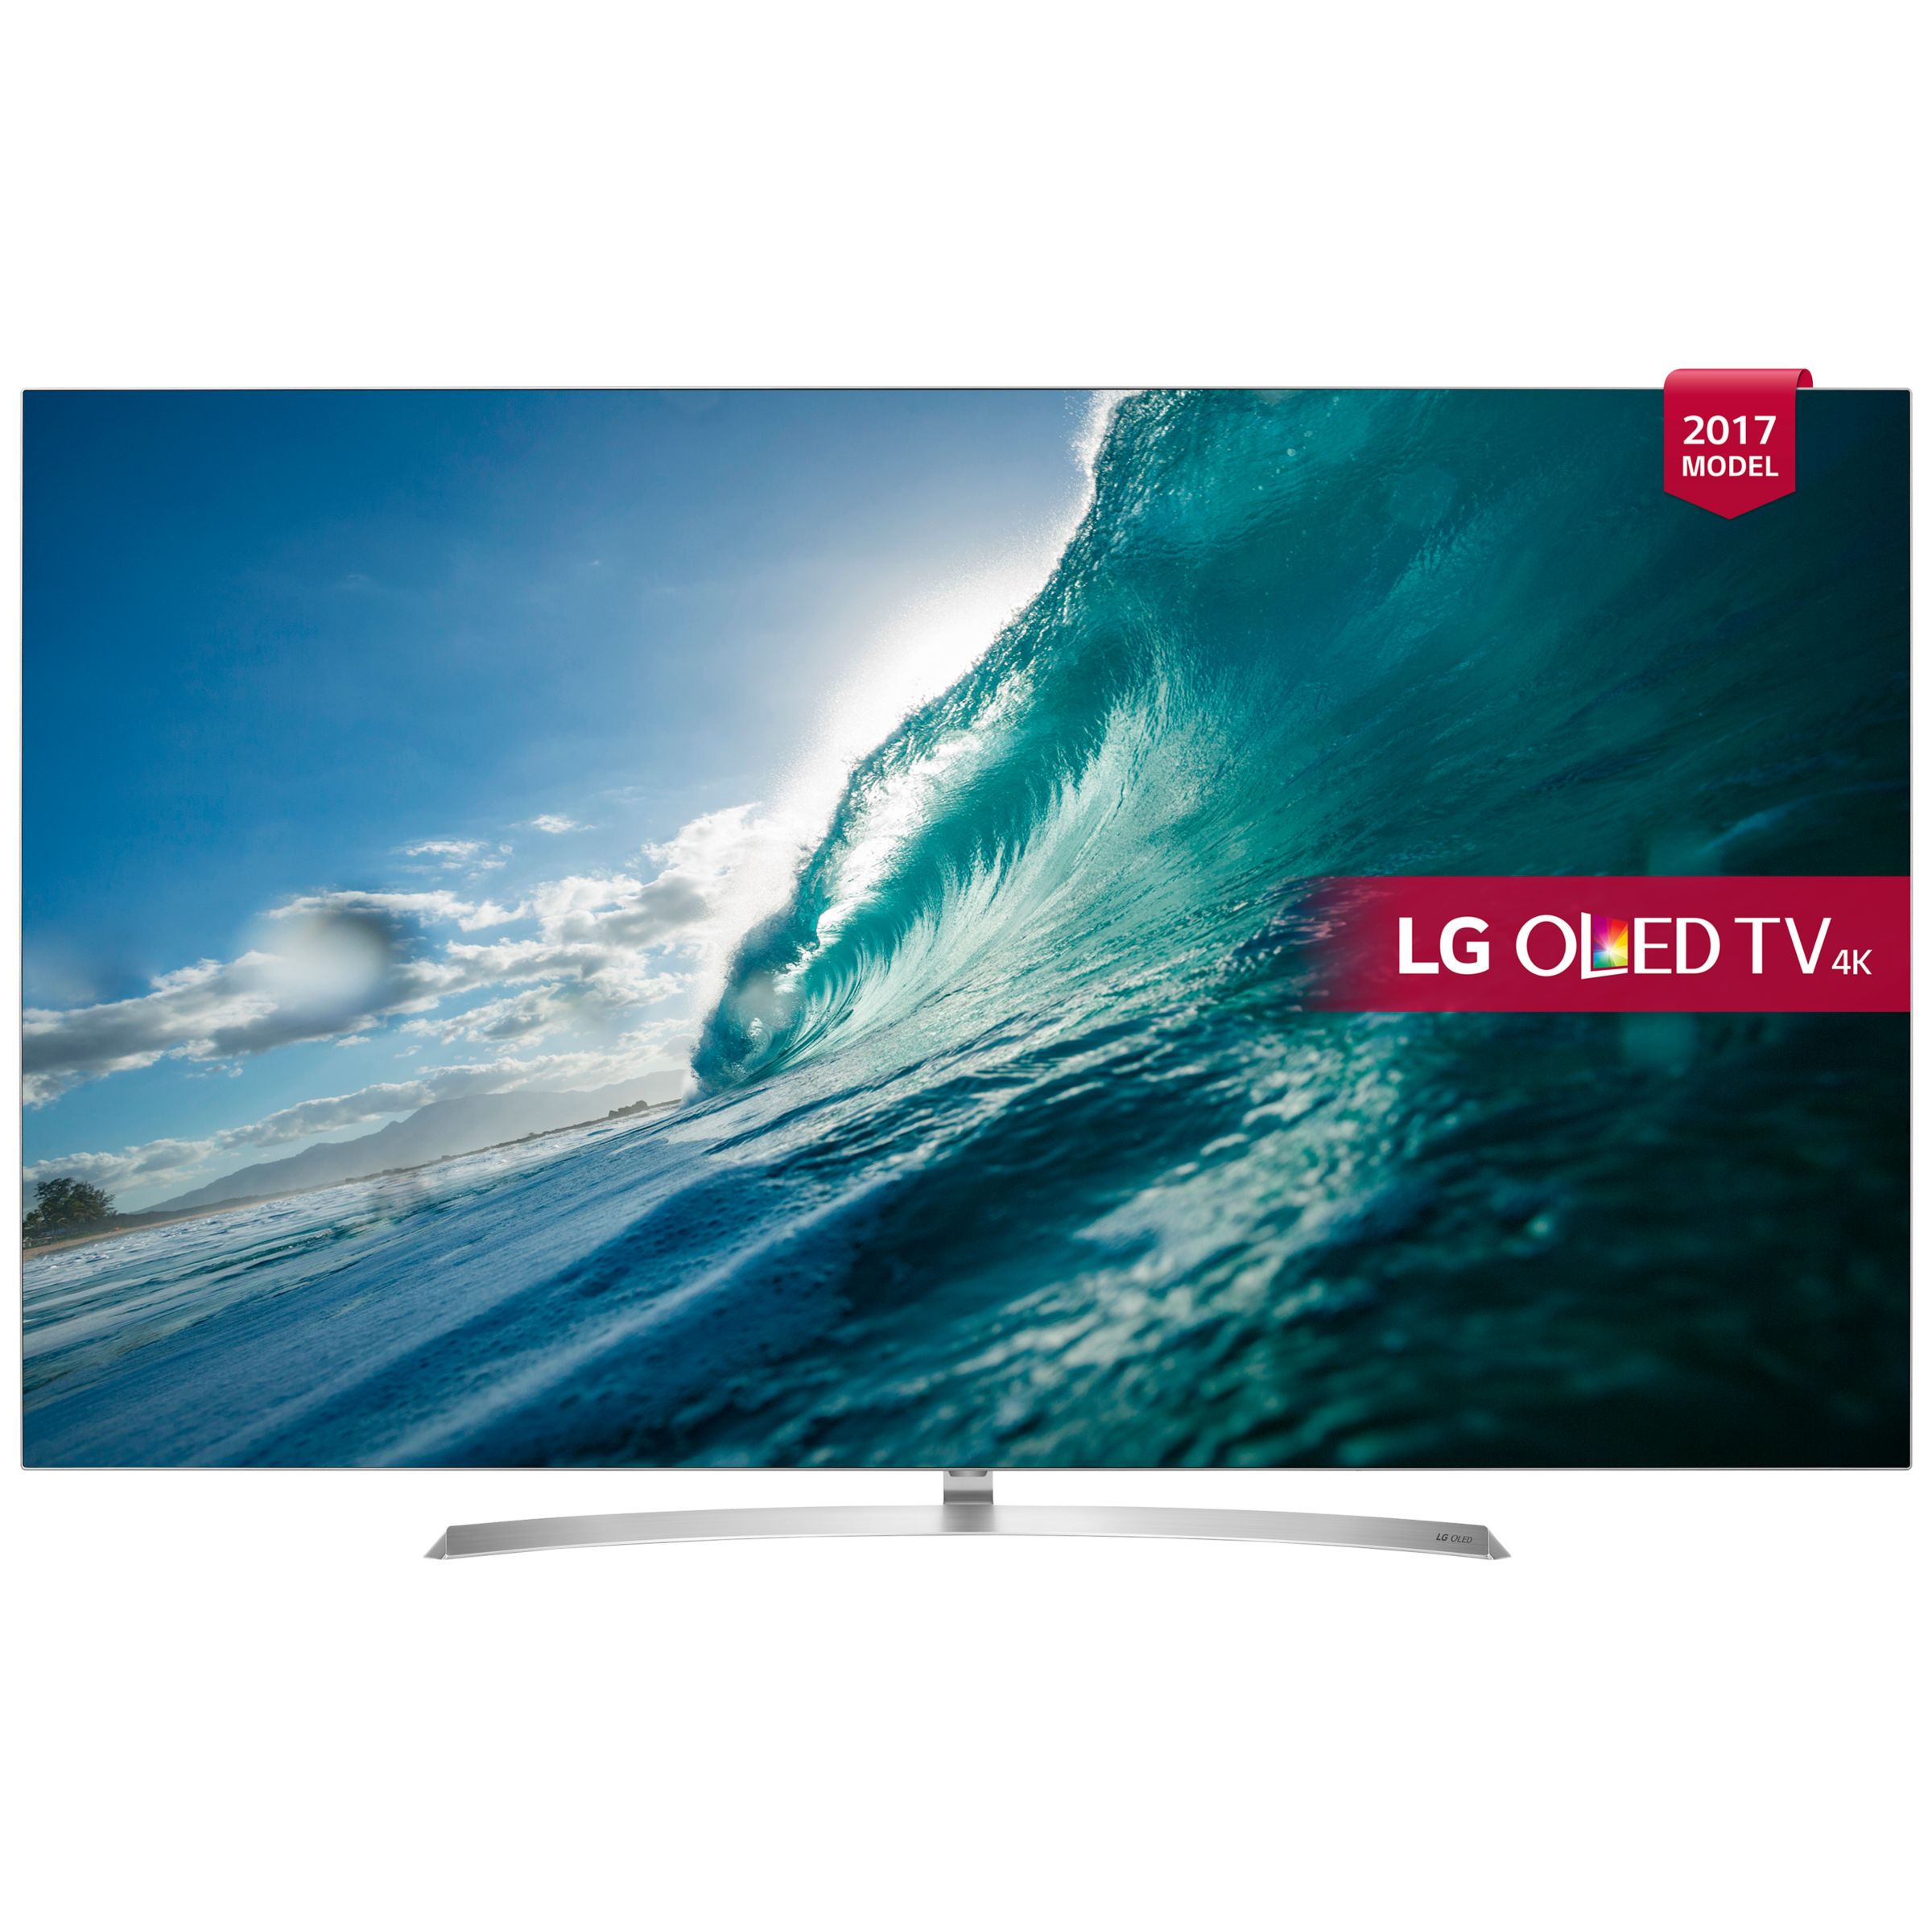 LG OLED65B7V OLED HDR 4K Ultra HD Smart TV, 65" with Freeview Play, Dolby Atmos, Picture-On-Metal Design & Crescent Stand, Silver